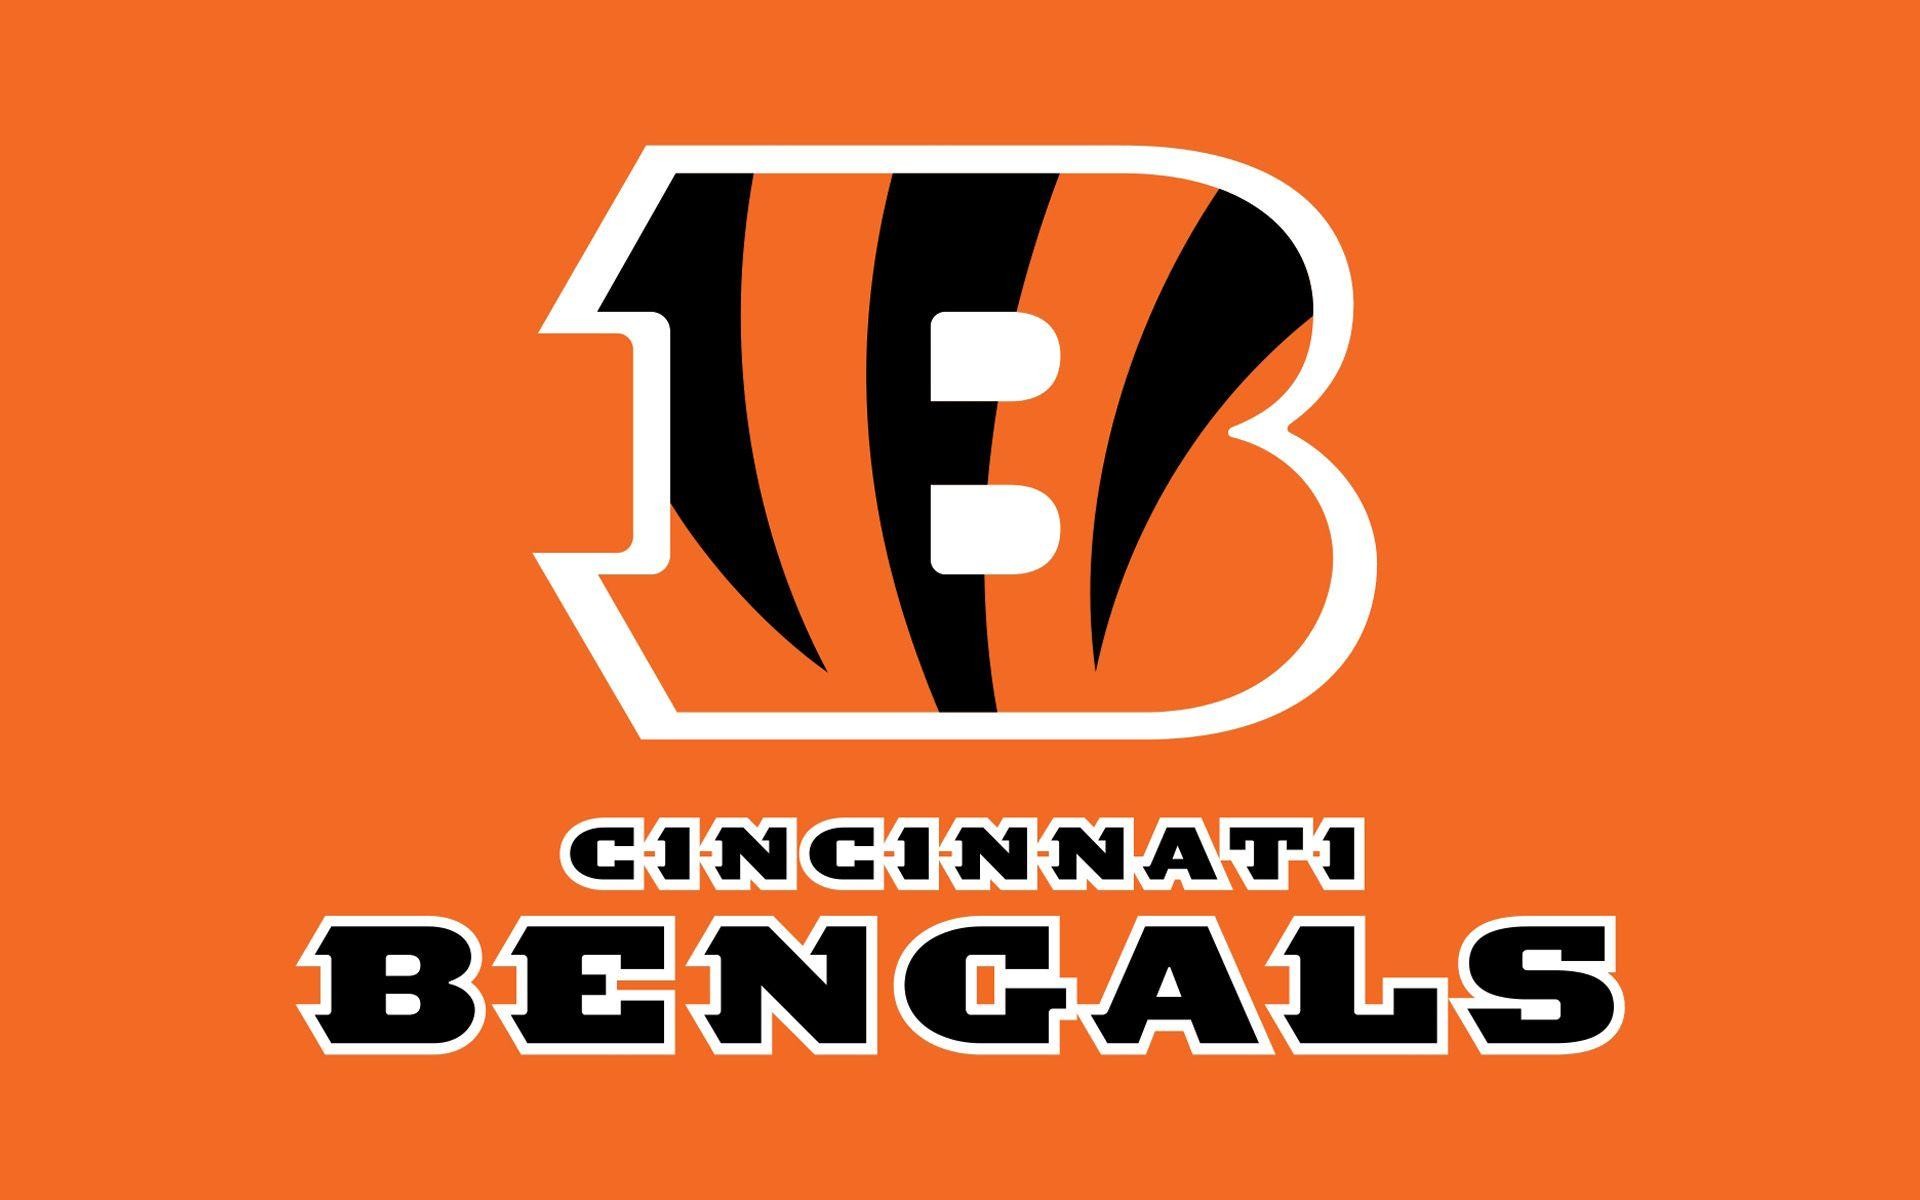 1920x1200 Bengals Wallpapers - Full HD wallpaper search